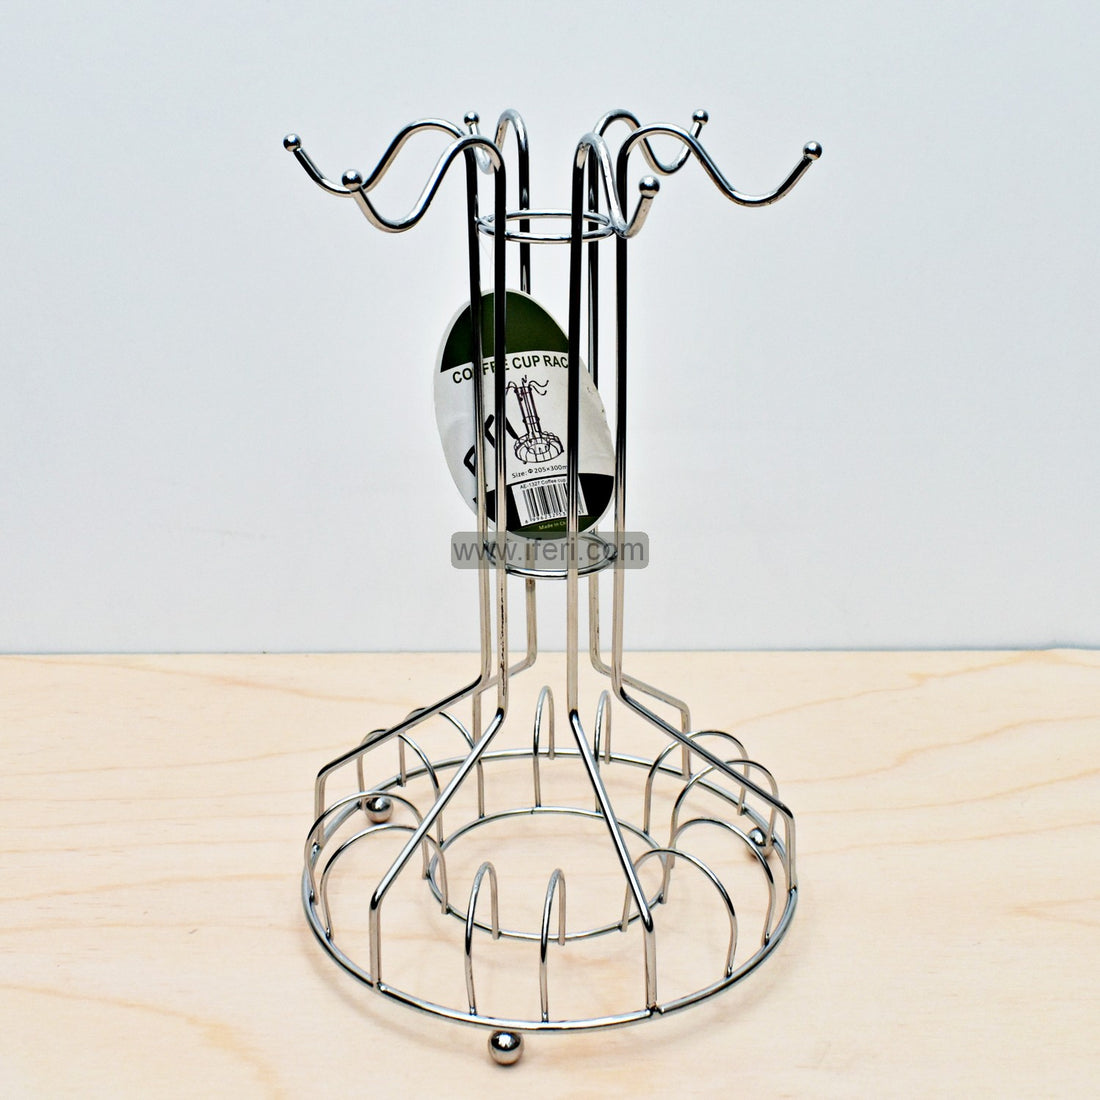 Buy Metal Cup Stand through online from iferi.com in Bangladesh